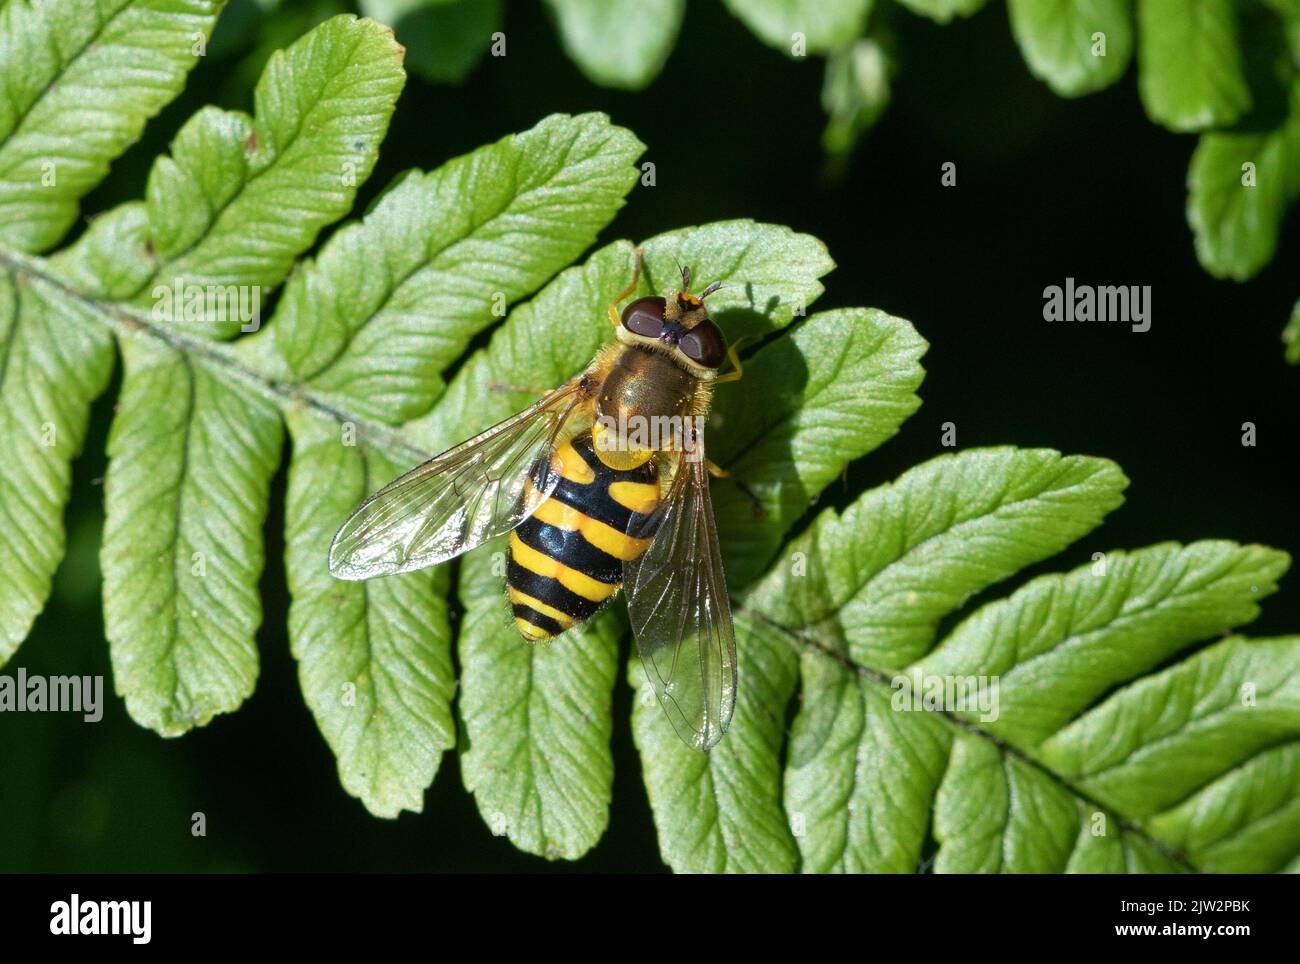 Syrphus species hoverfly on fern leaf Stock Photo